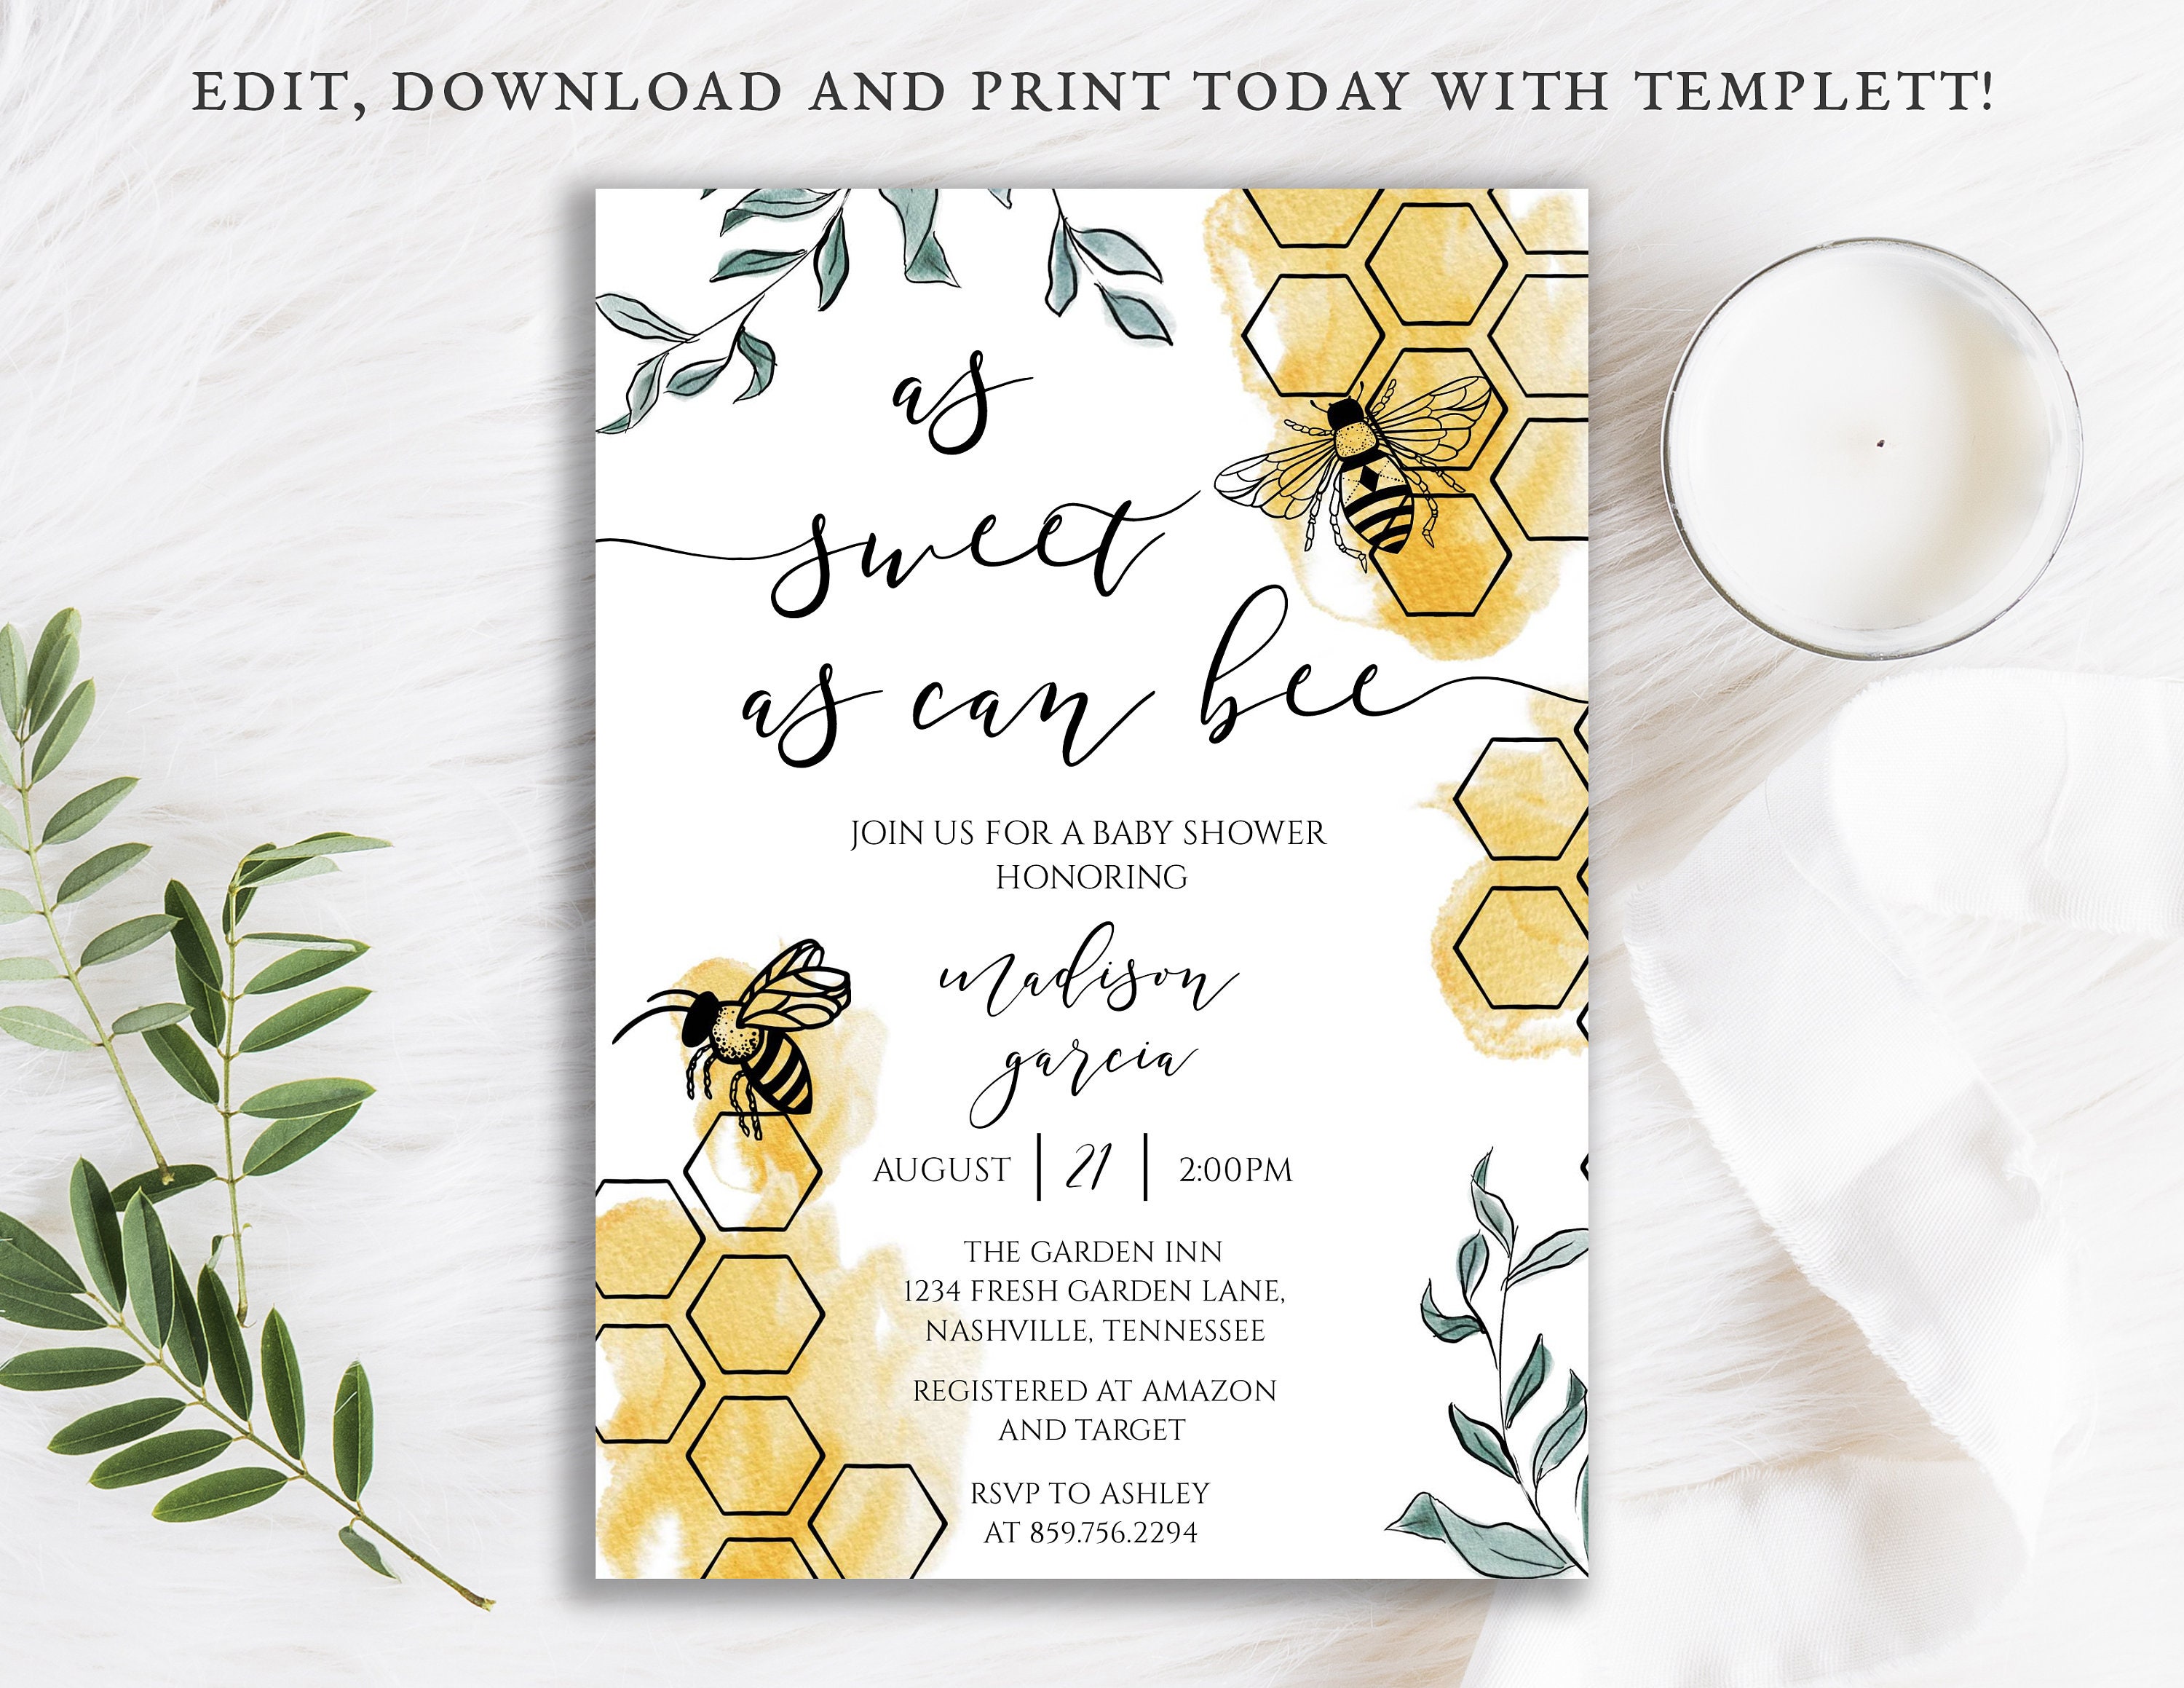 As Sweet as Can Bee Baby Shower Invitation Bumble Bee Shower